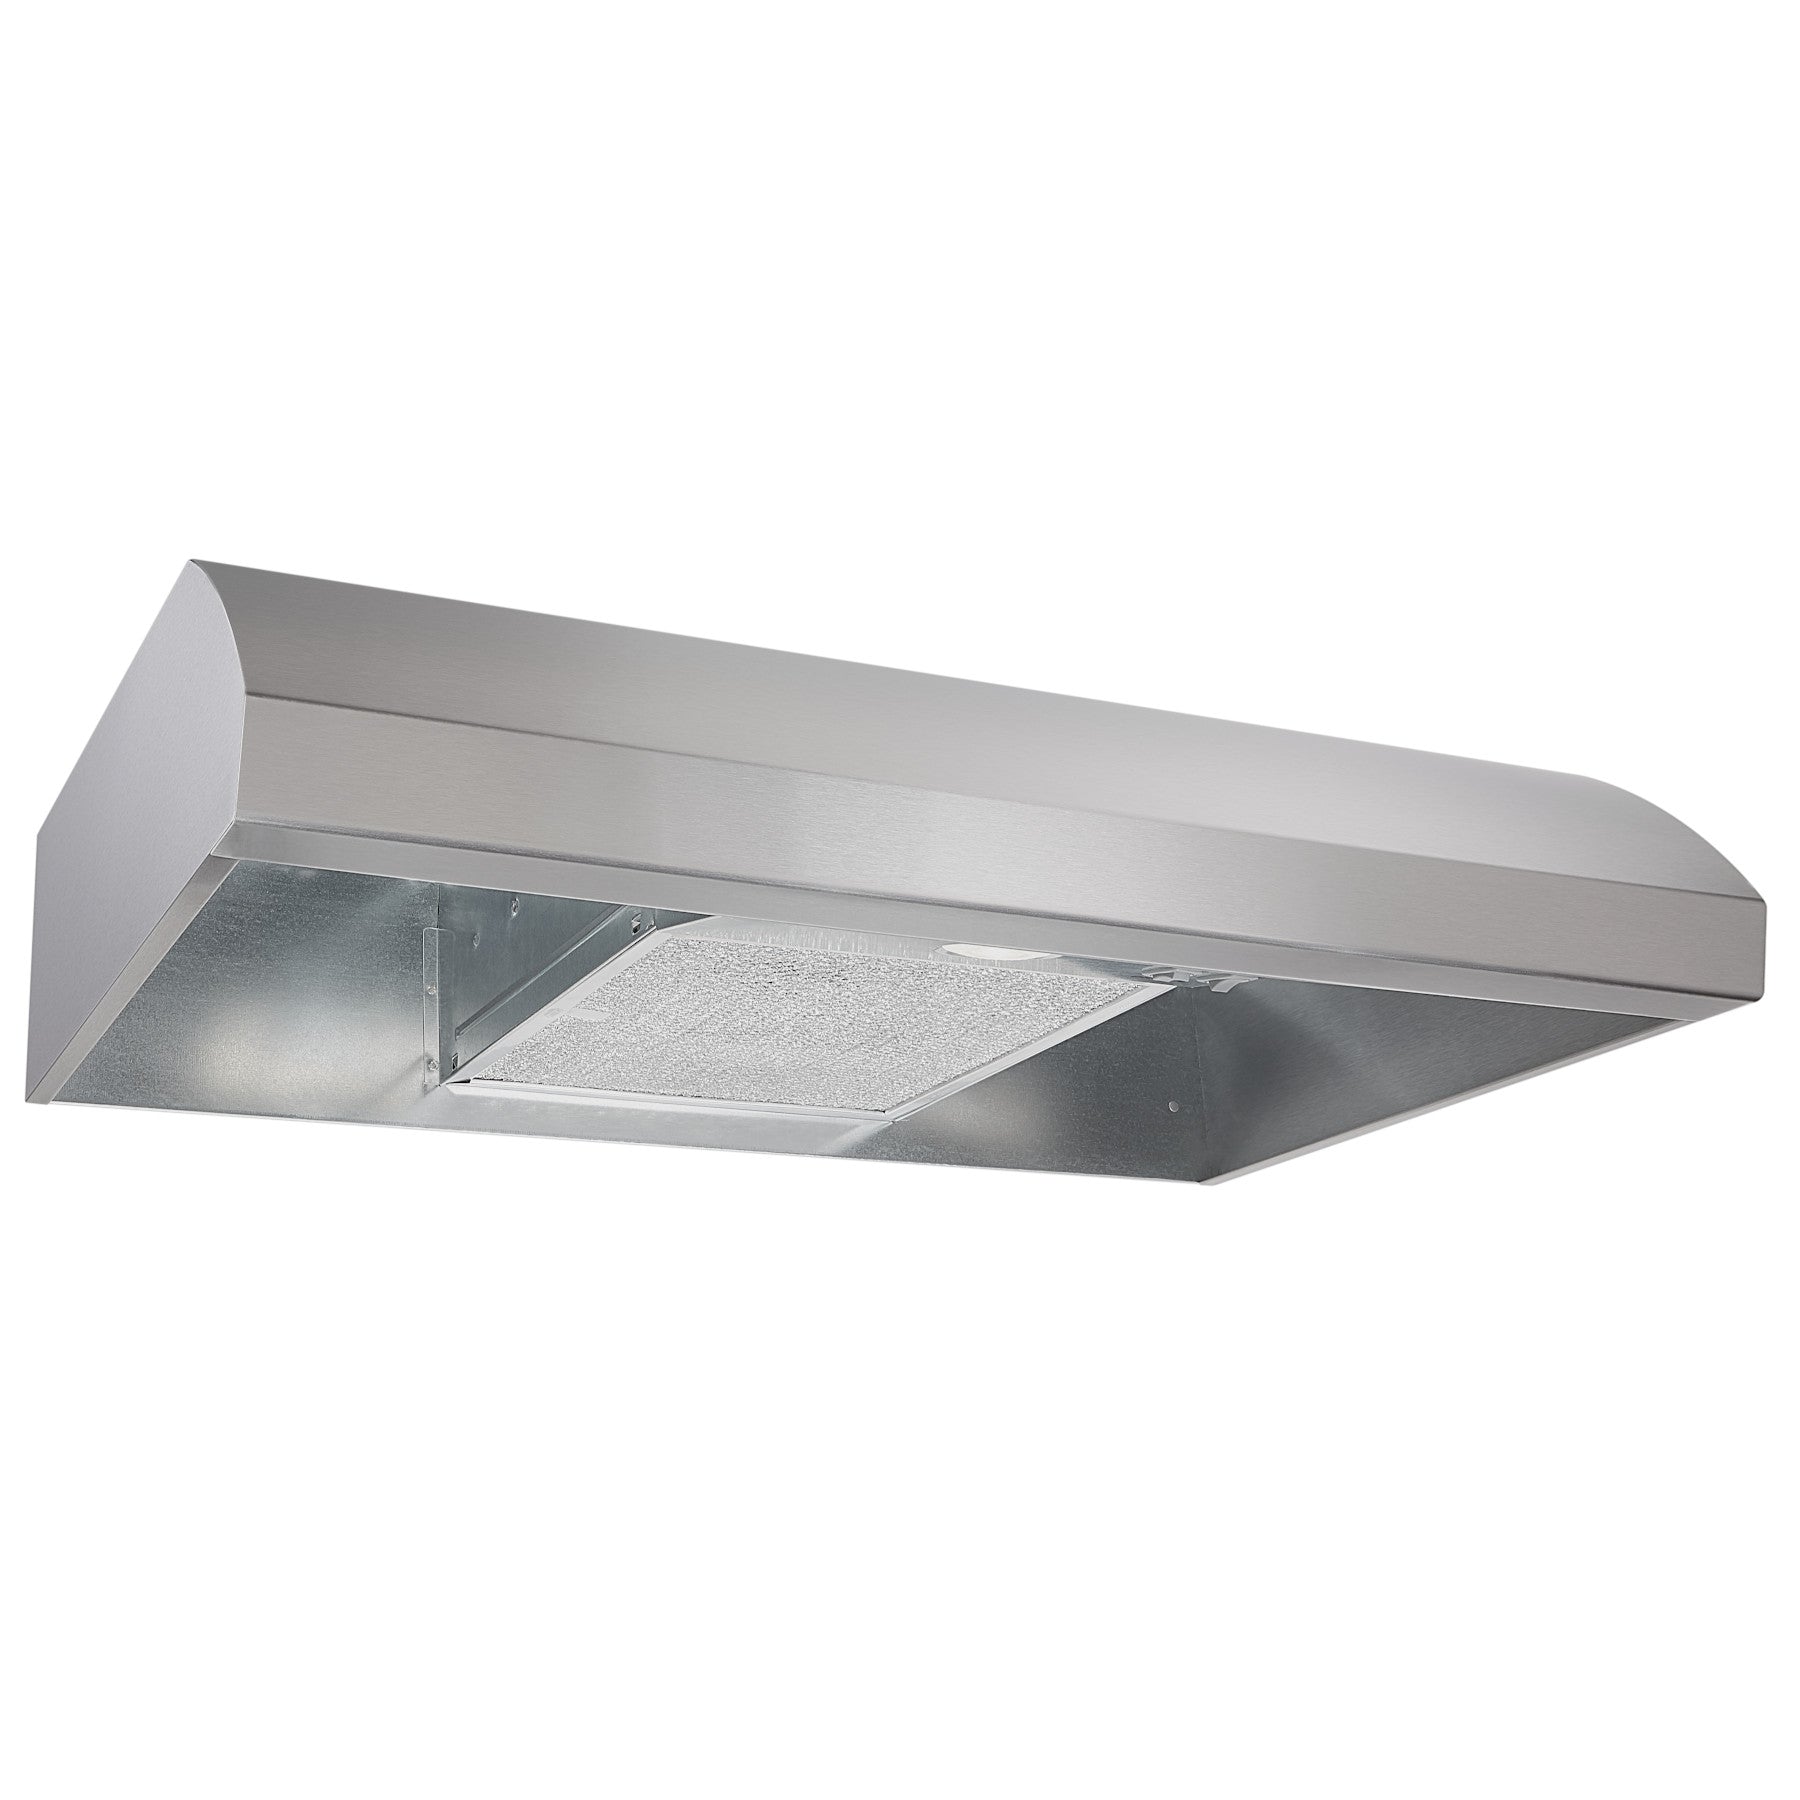 Broan - 30 Inch 270 CFM Under Cabinet Range Vent in Stainless - BXT130SSC